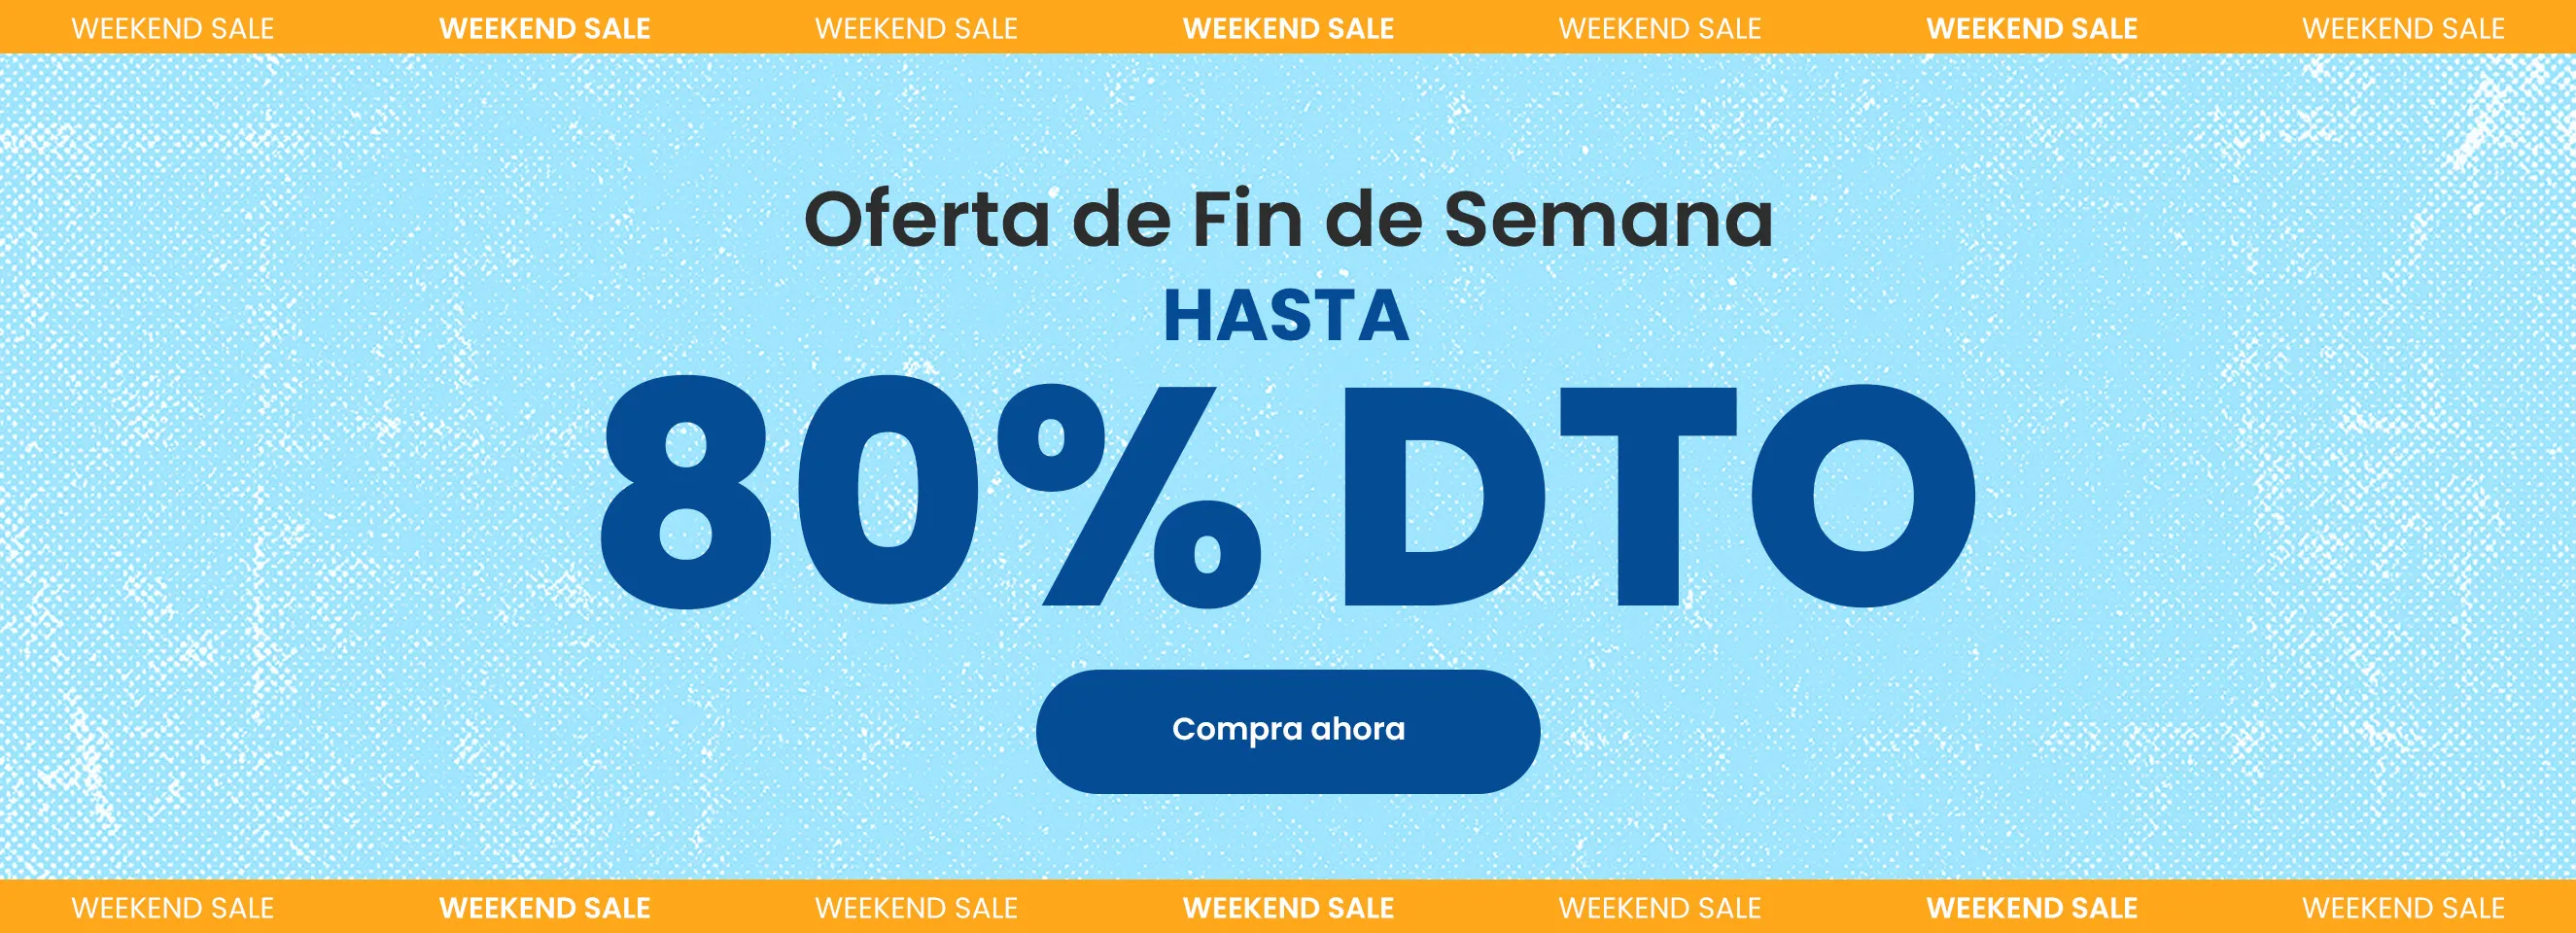 Click it to join Weekend Sale activity